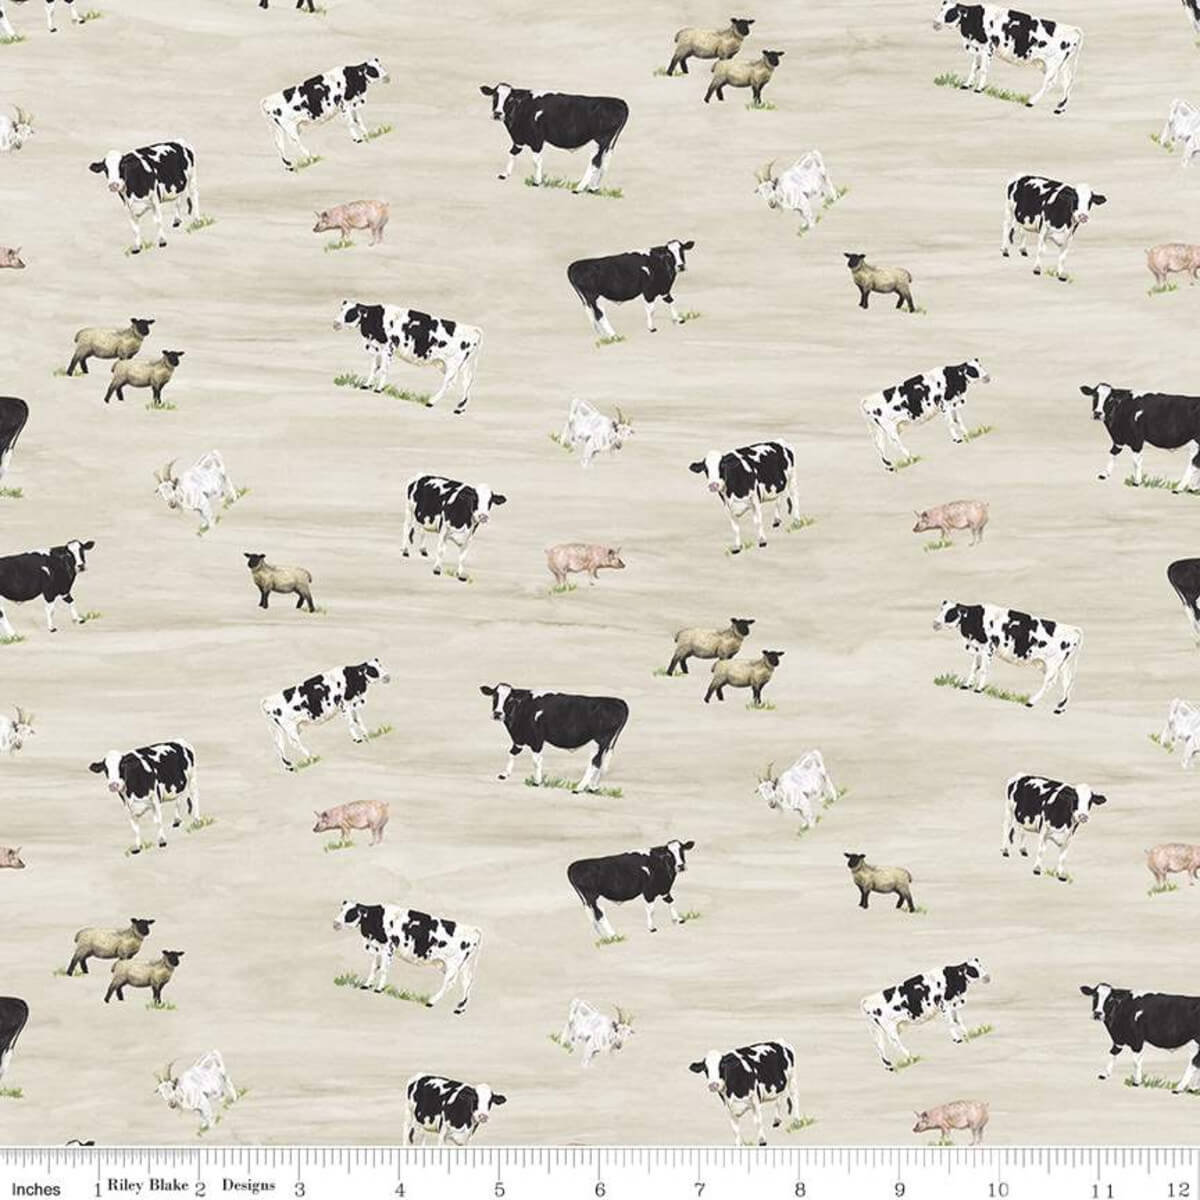 Barn Quilts Fabric available at Nancy Zieman Productions at ShopNZP.com